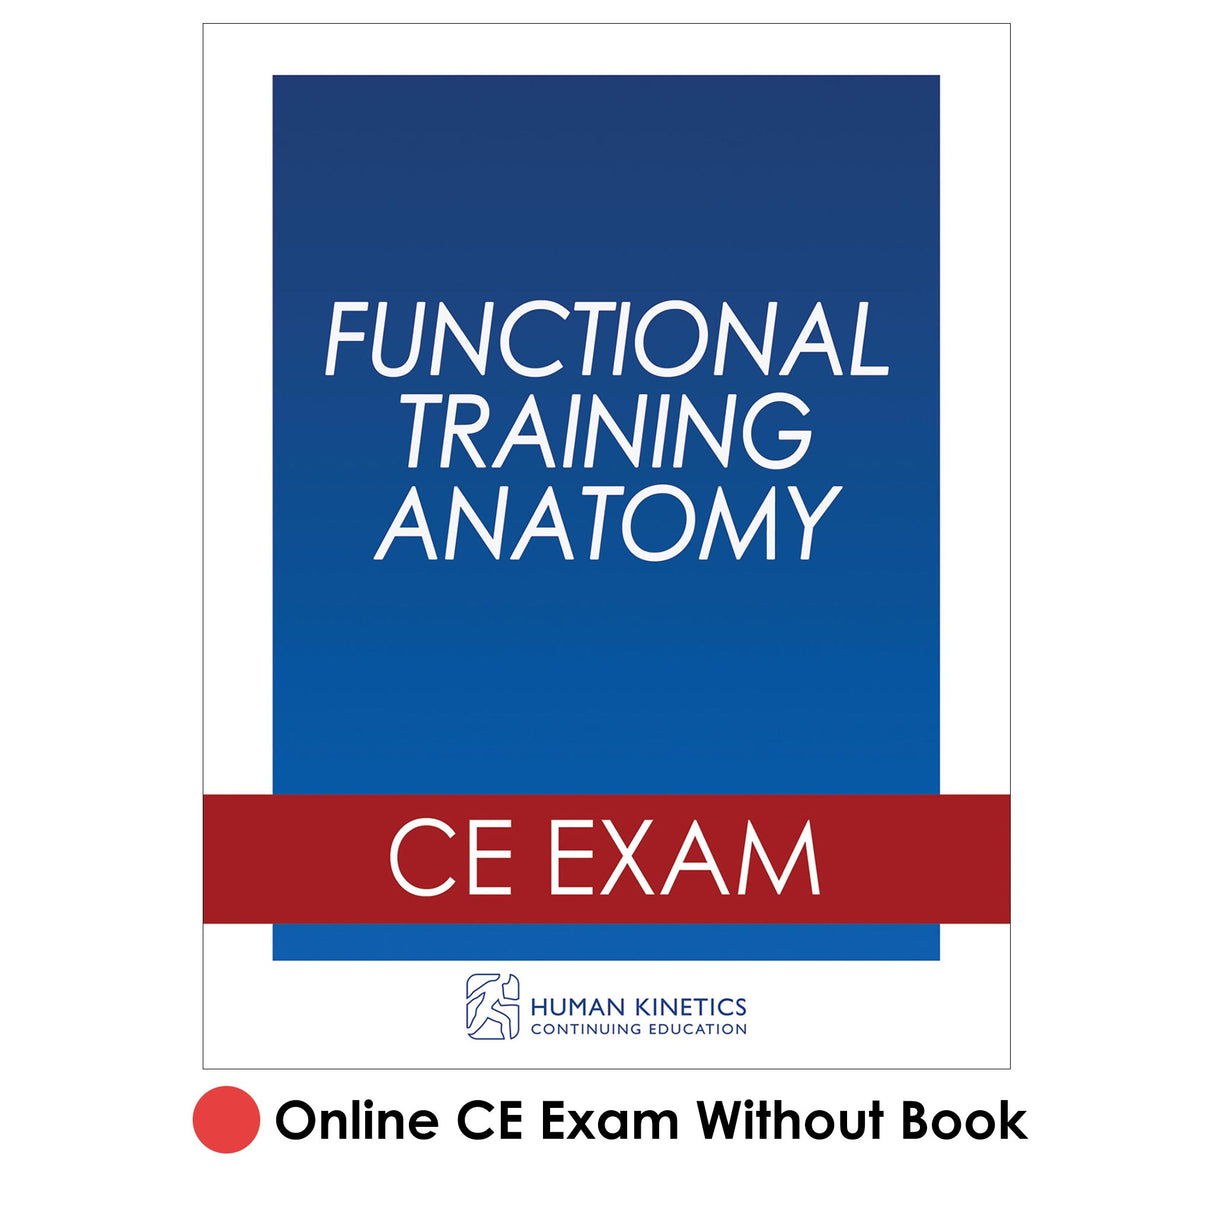 Functional Training Anatomy Online CE Exam Without Book